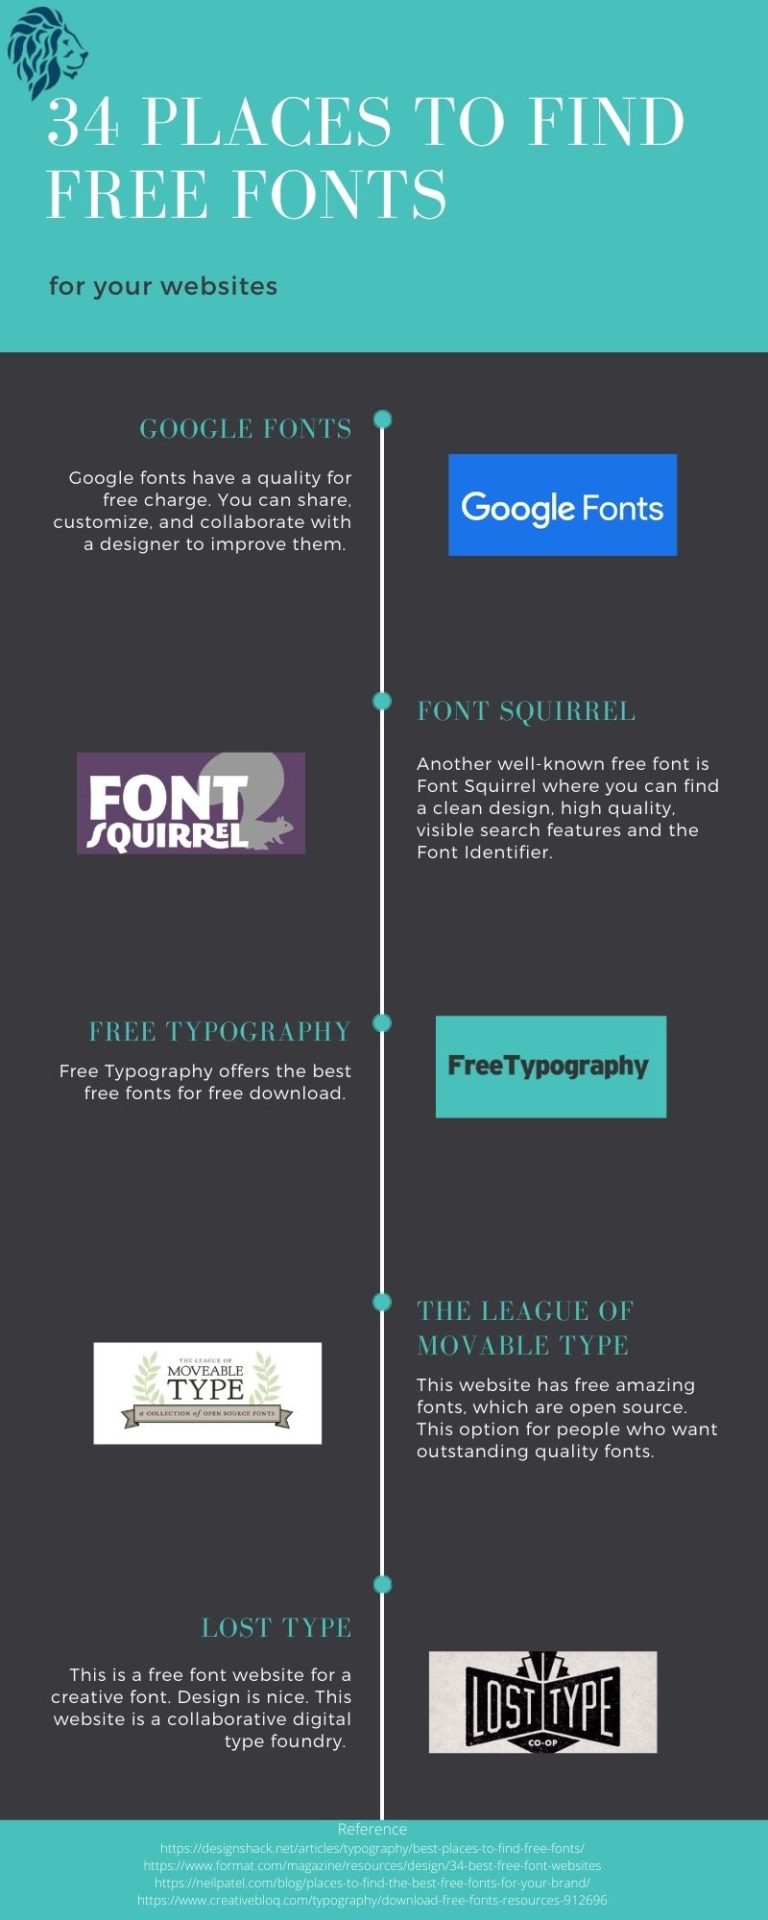 11 best places to find free fonts